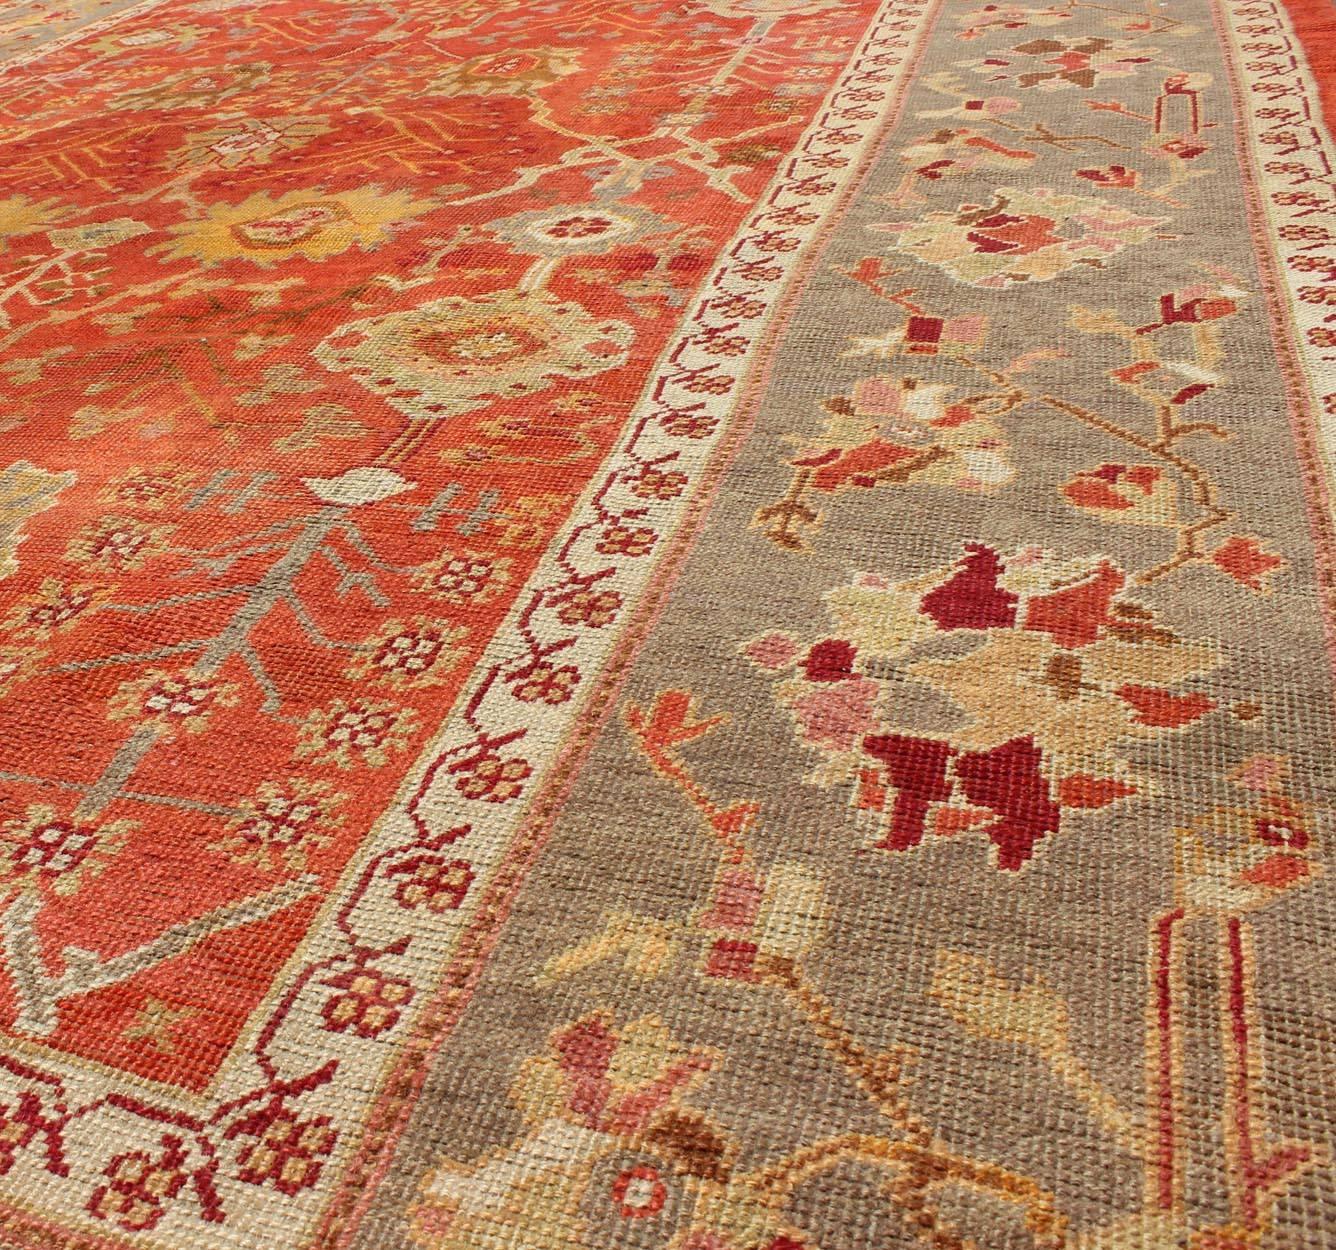 20th Century  Antique Turkish Oushak Rug With All-Over Design On Orange Red Gray Border For Sale